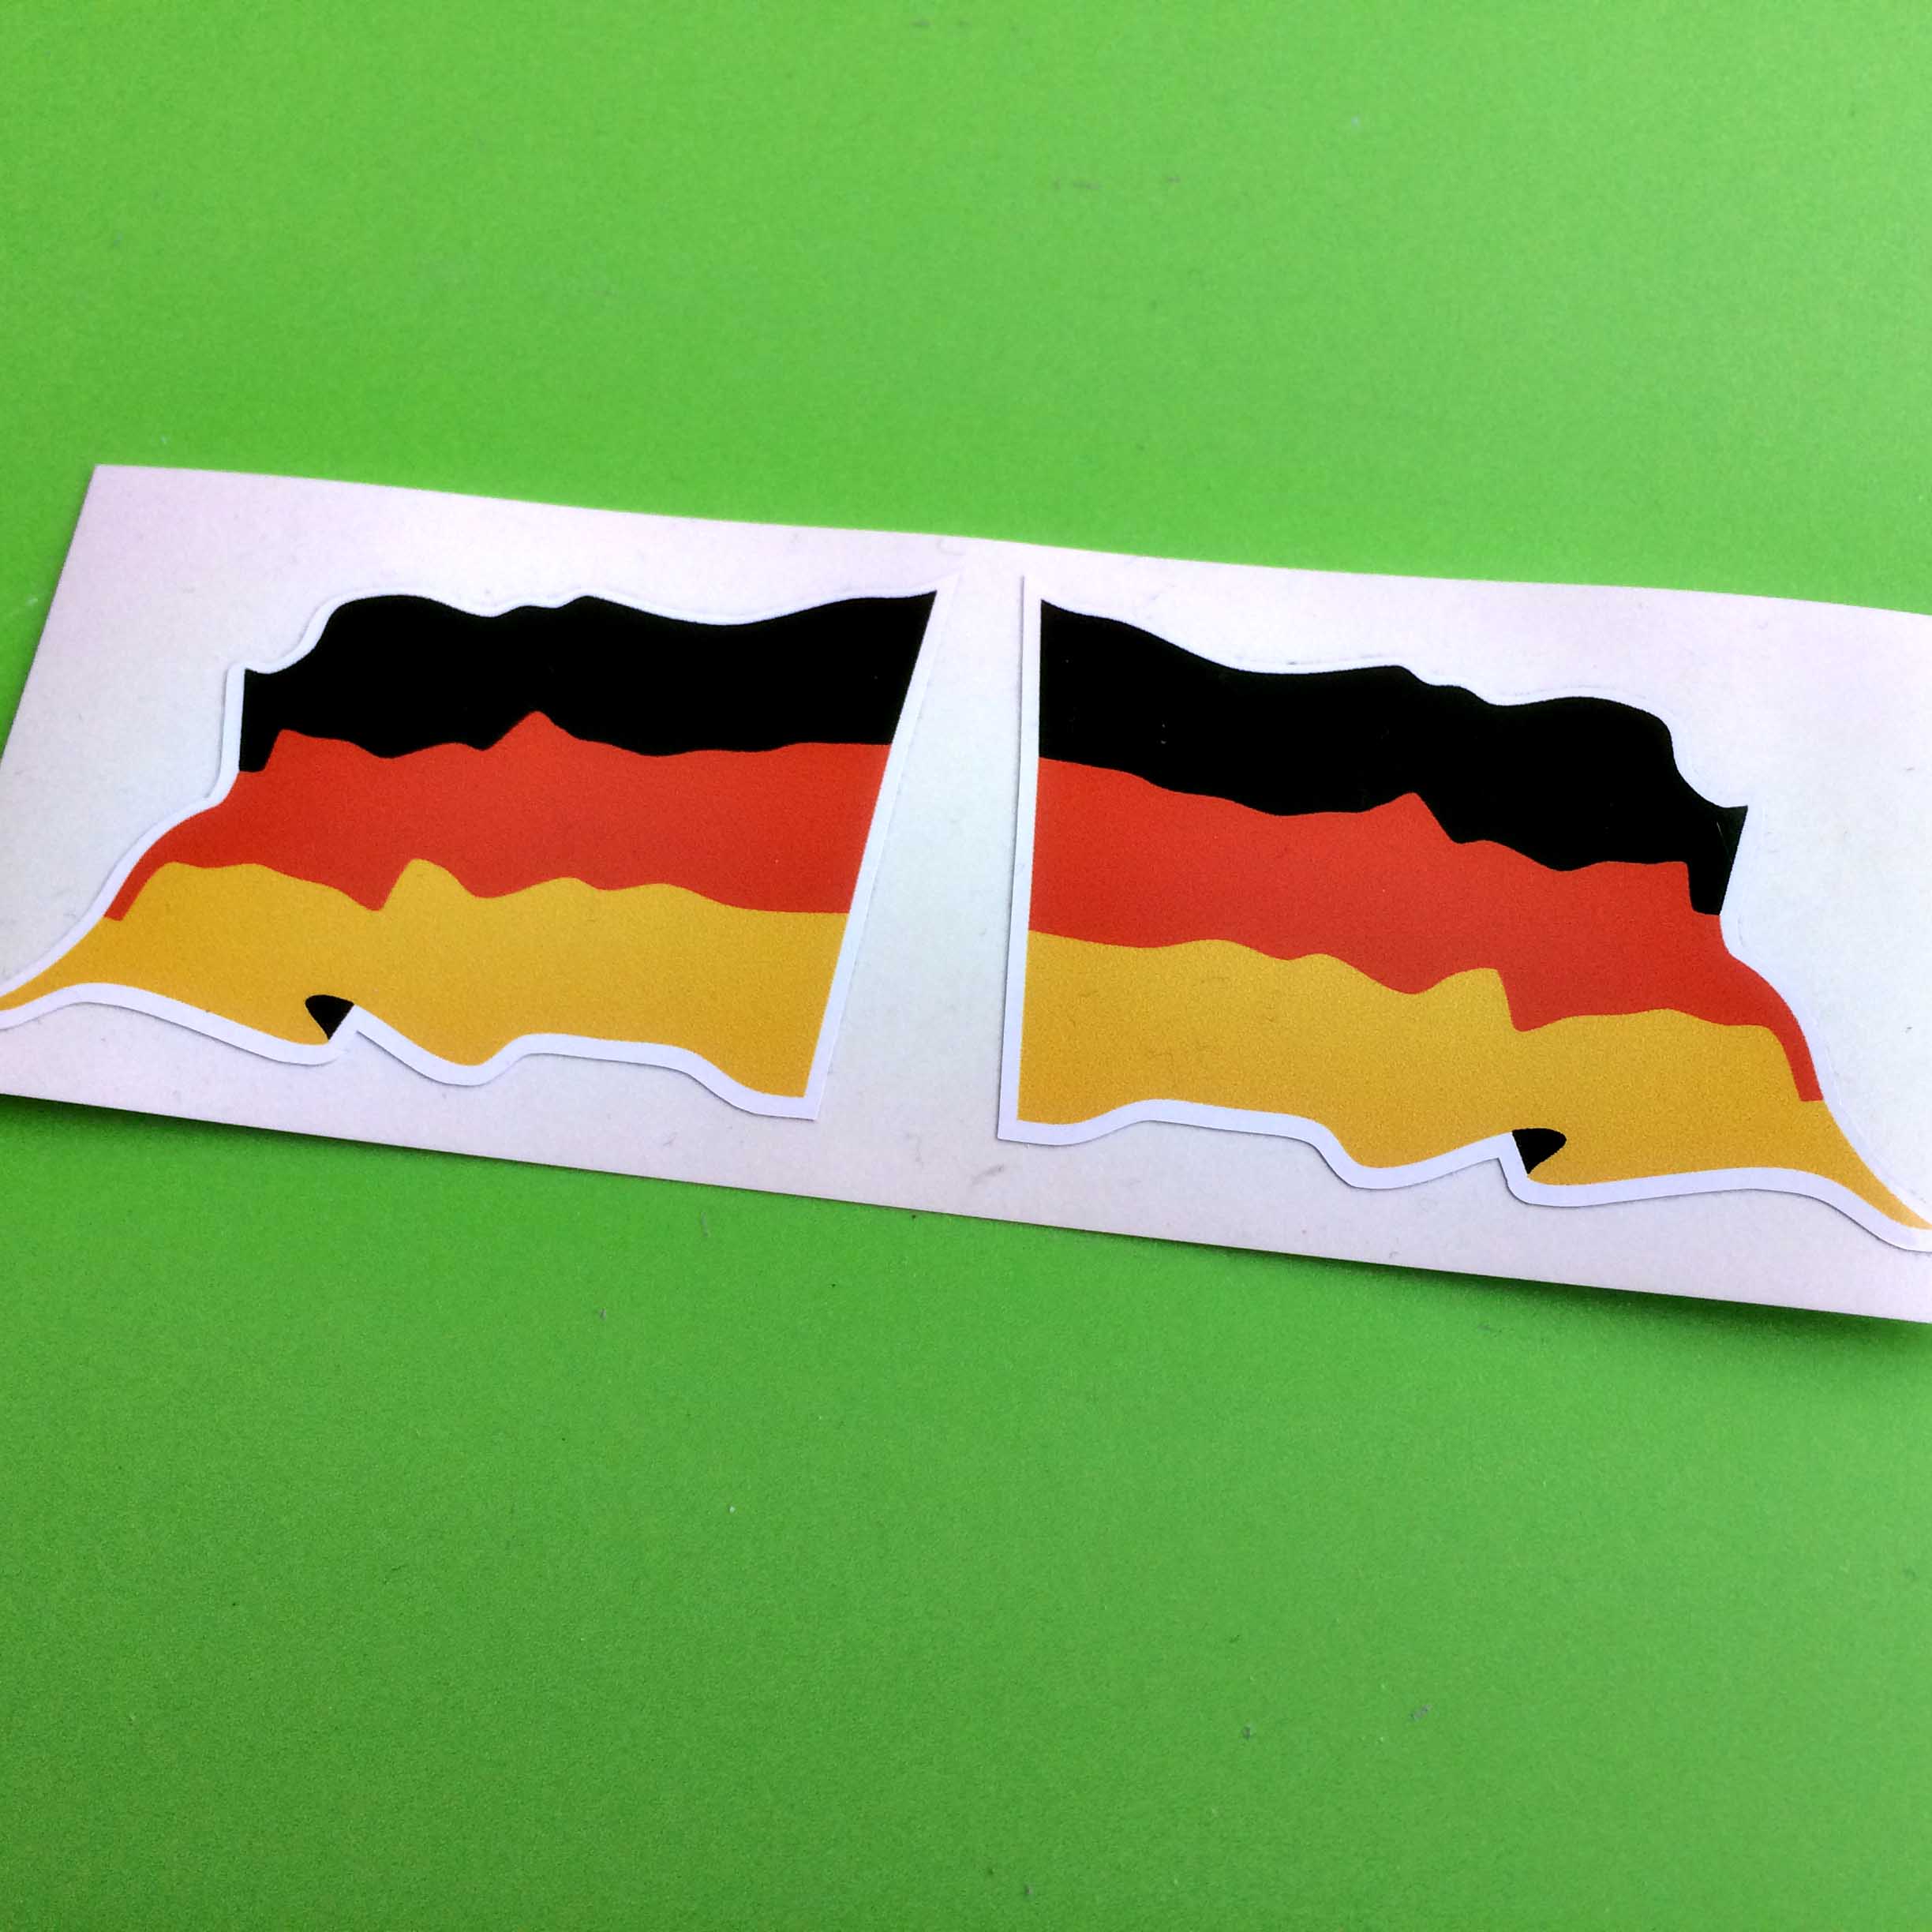 GERMAN GERMANY WAVY FLAG STICKERS. A wavy flag of Germany. Three horizontal bands of black, red and gold.